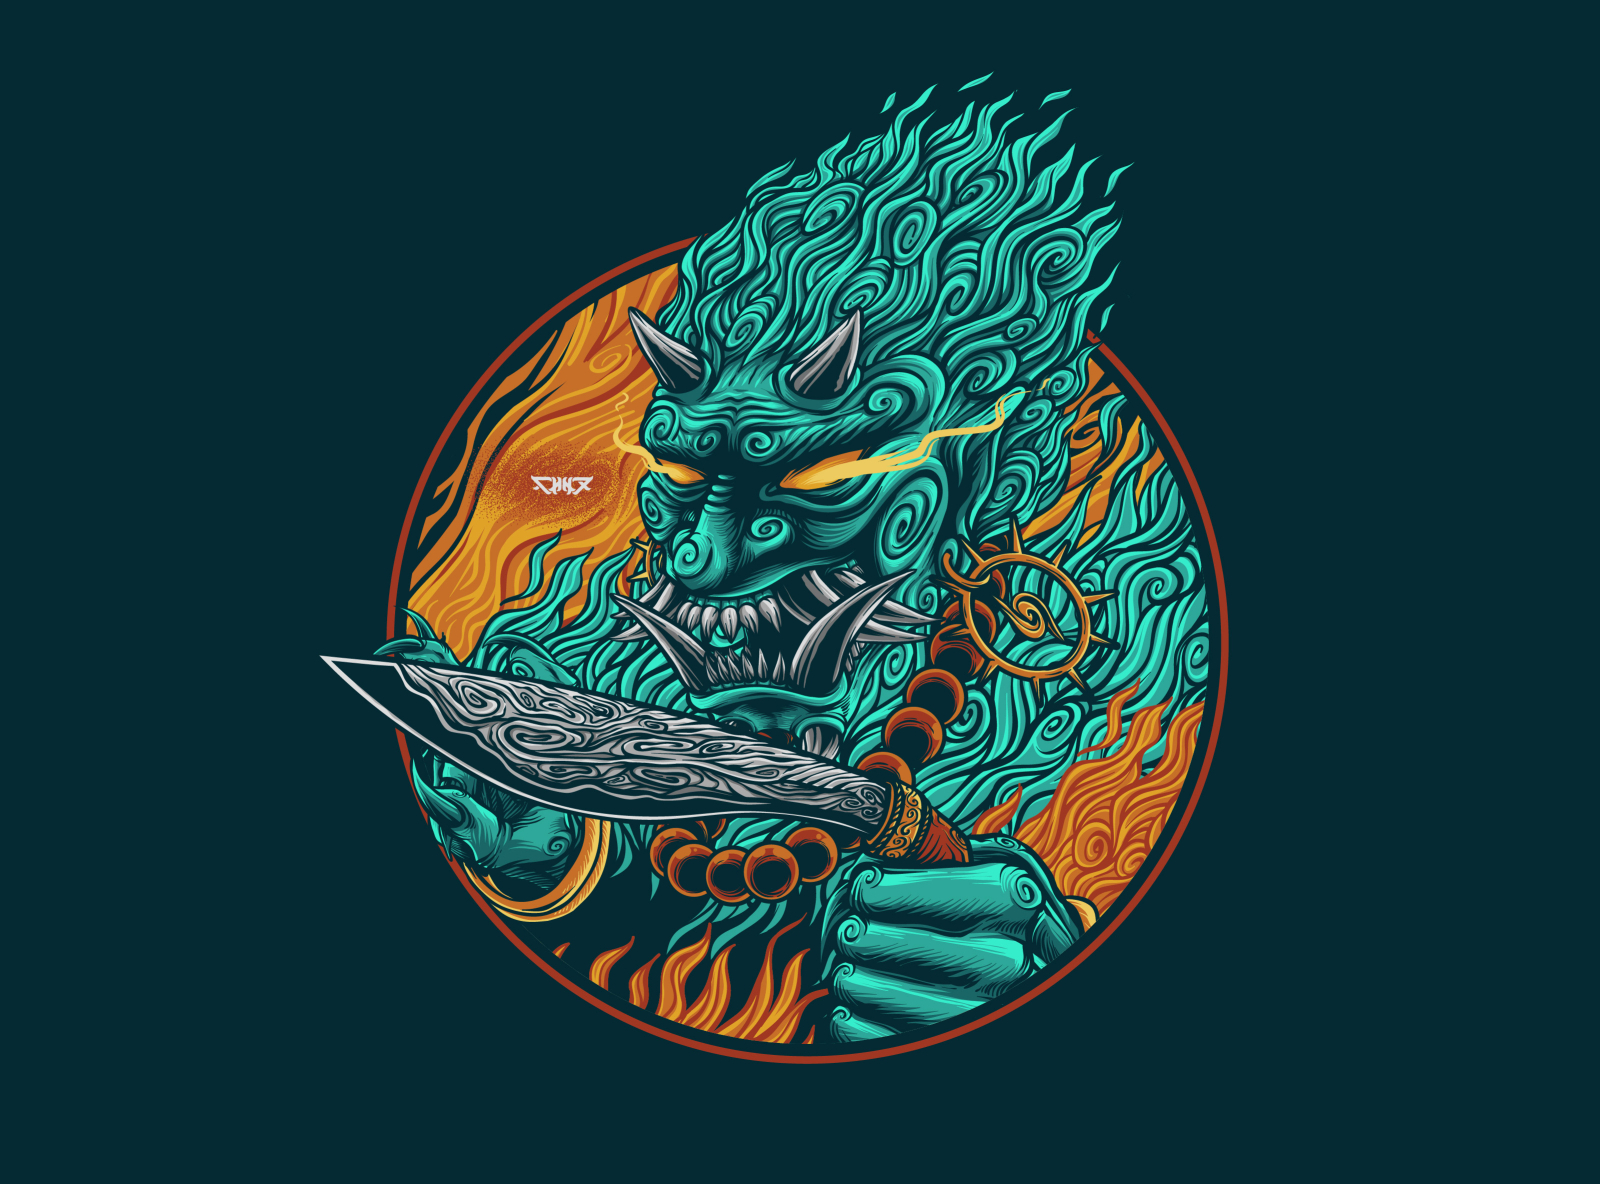 Weapon and Soul by CH NX on Dribbble